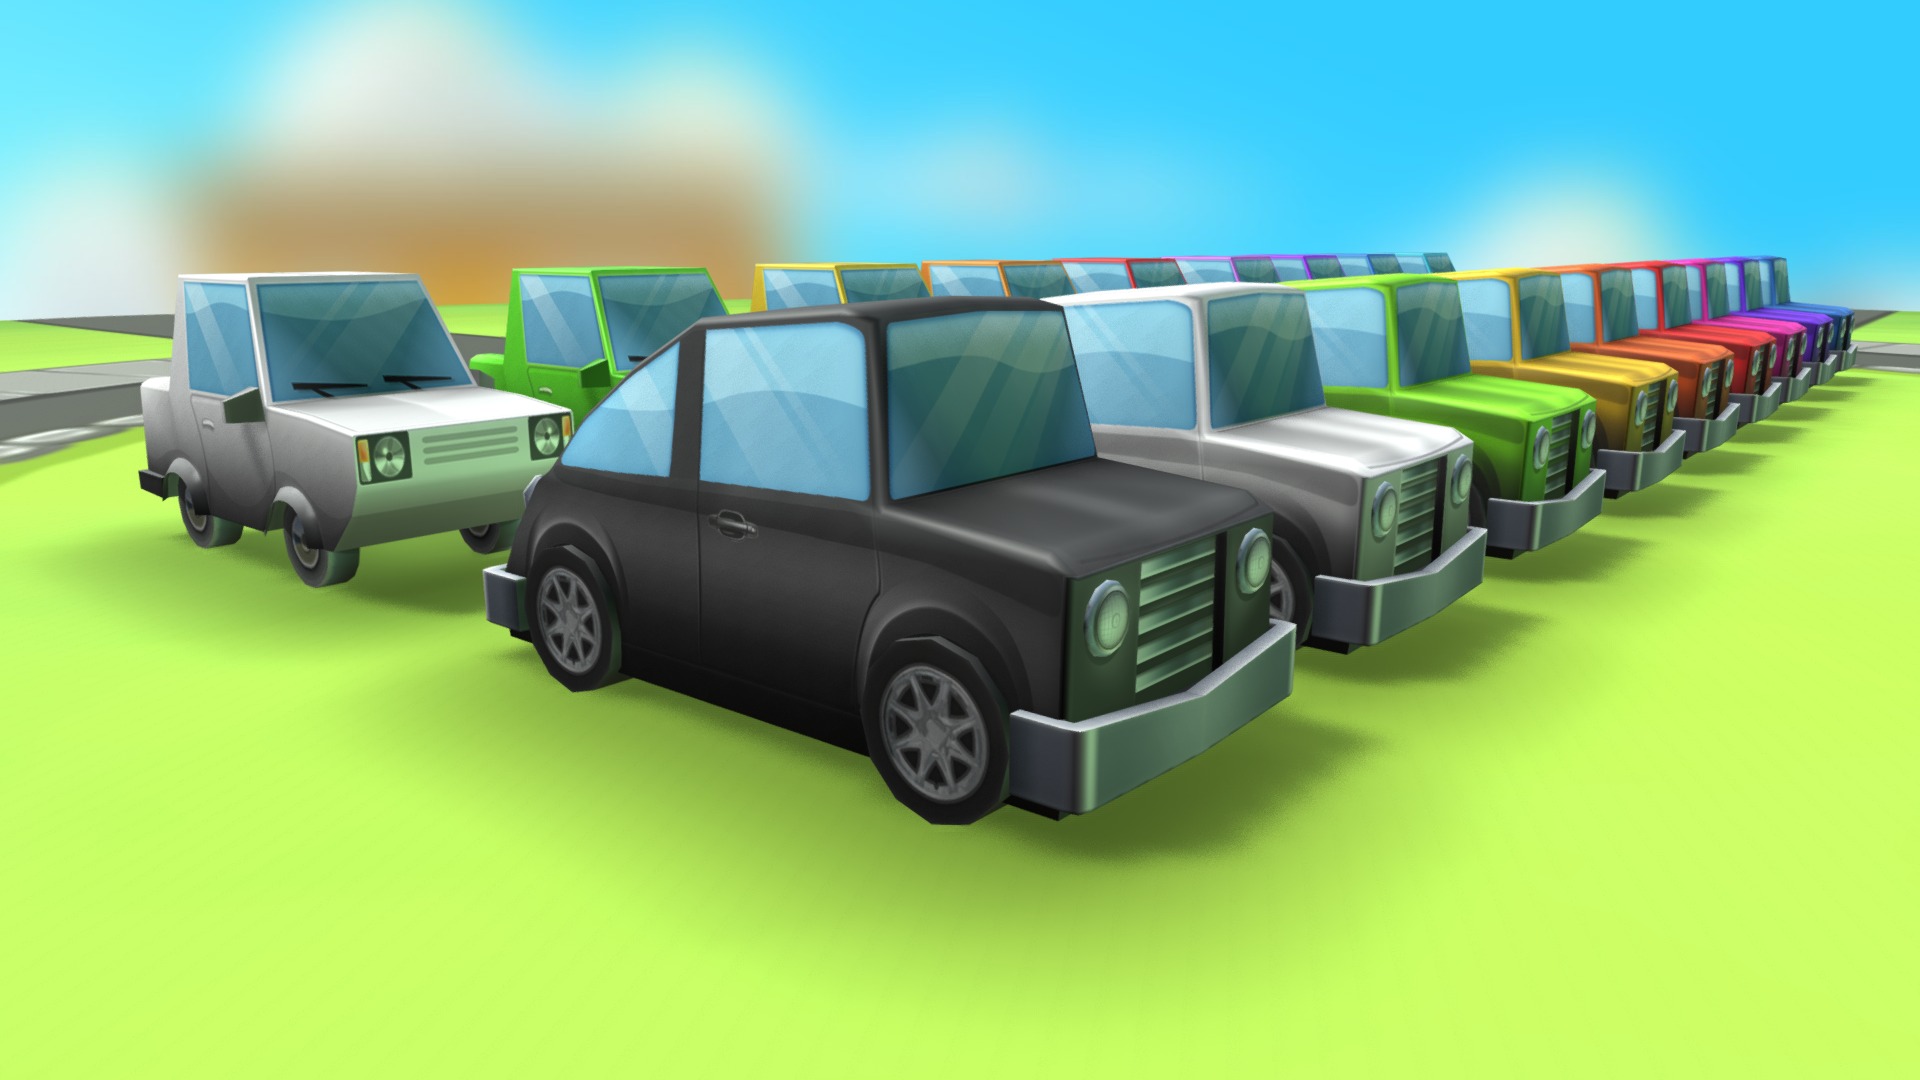 3D model LOW POLY – Toon Cars - This is a 3D model of the LOW POLY - Toon Cars. The 3D model is about a group of cars parked on a grass field.